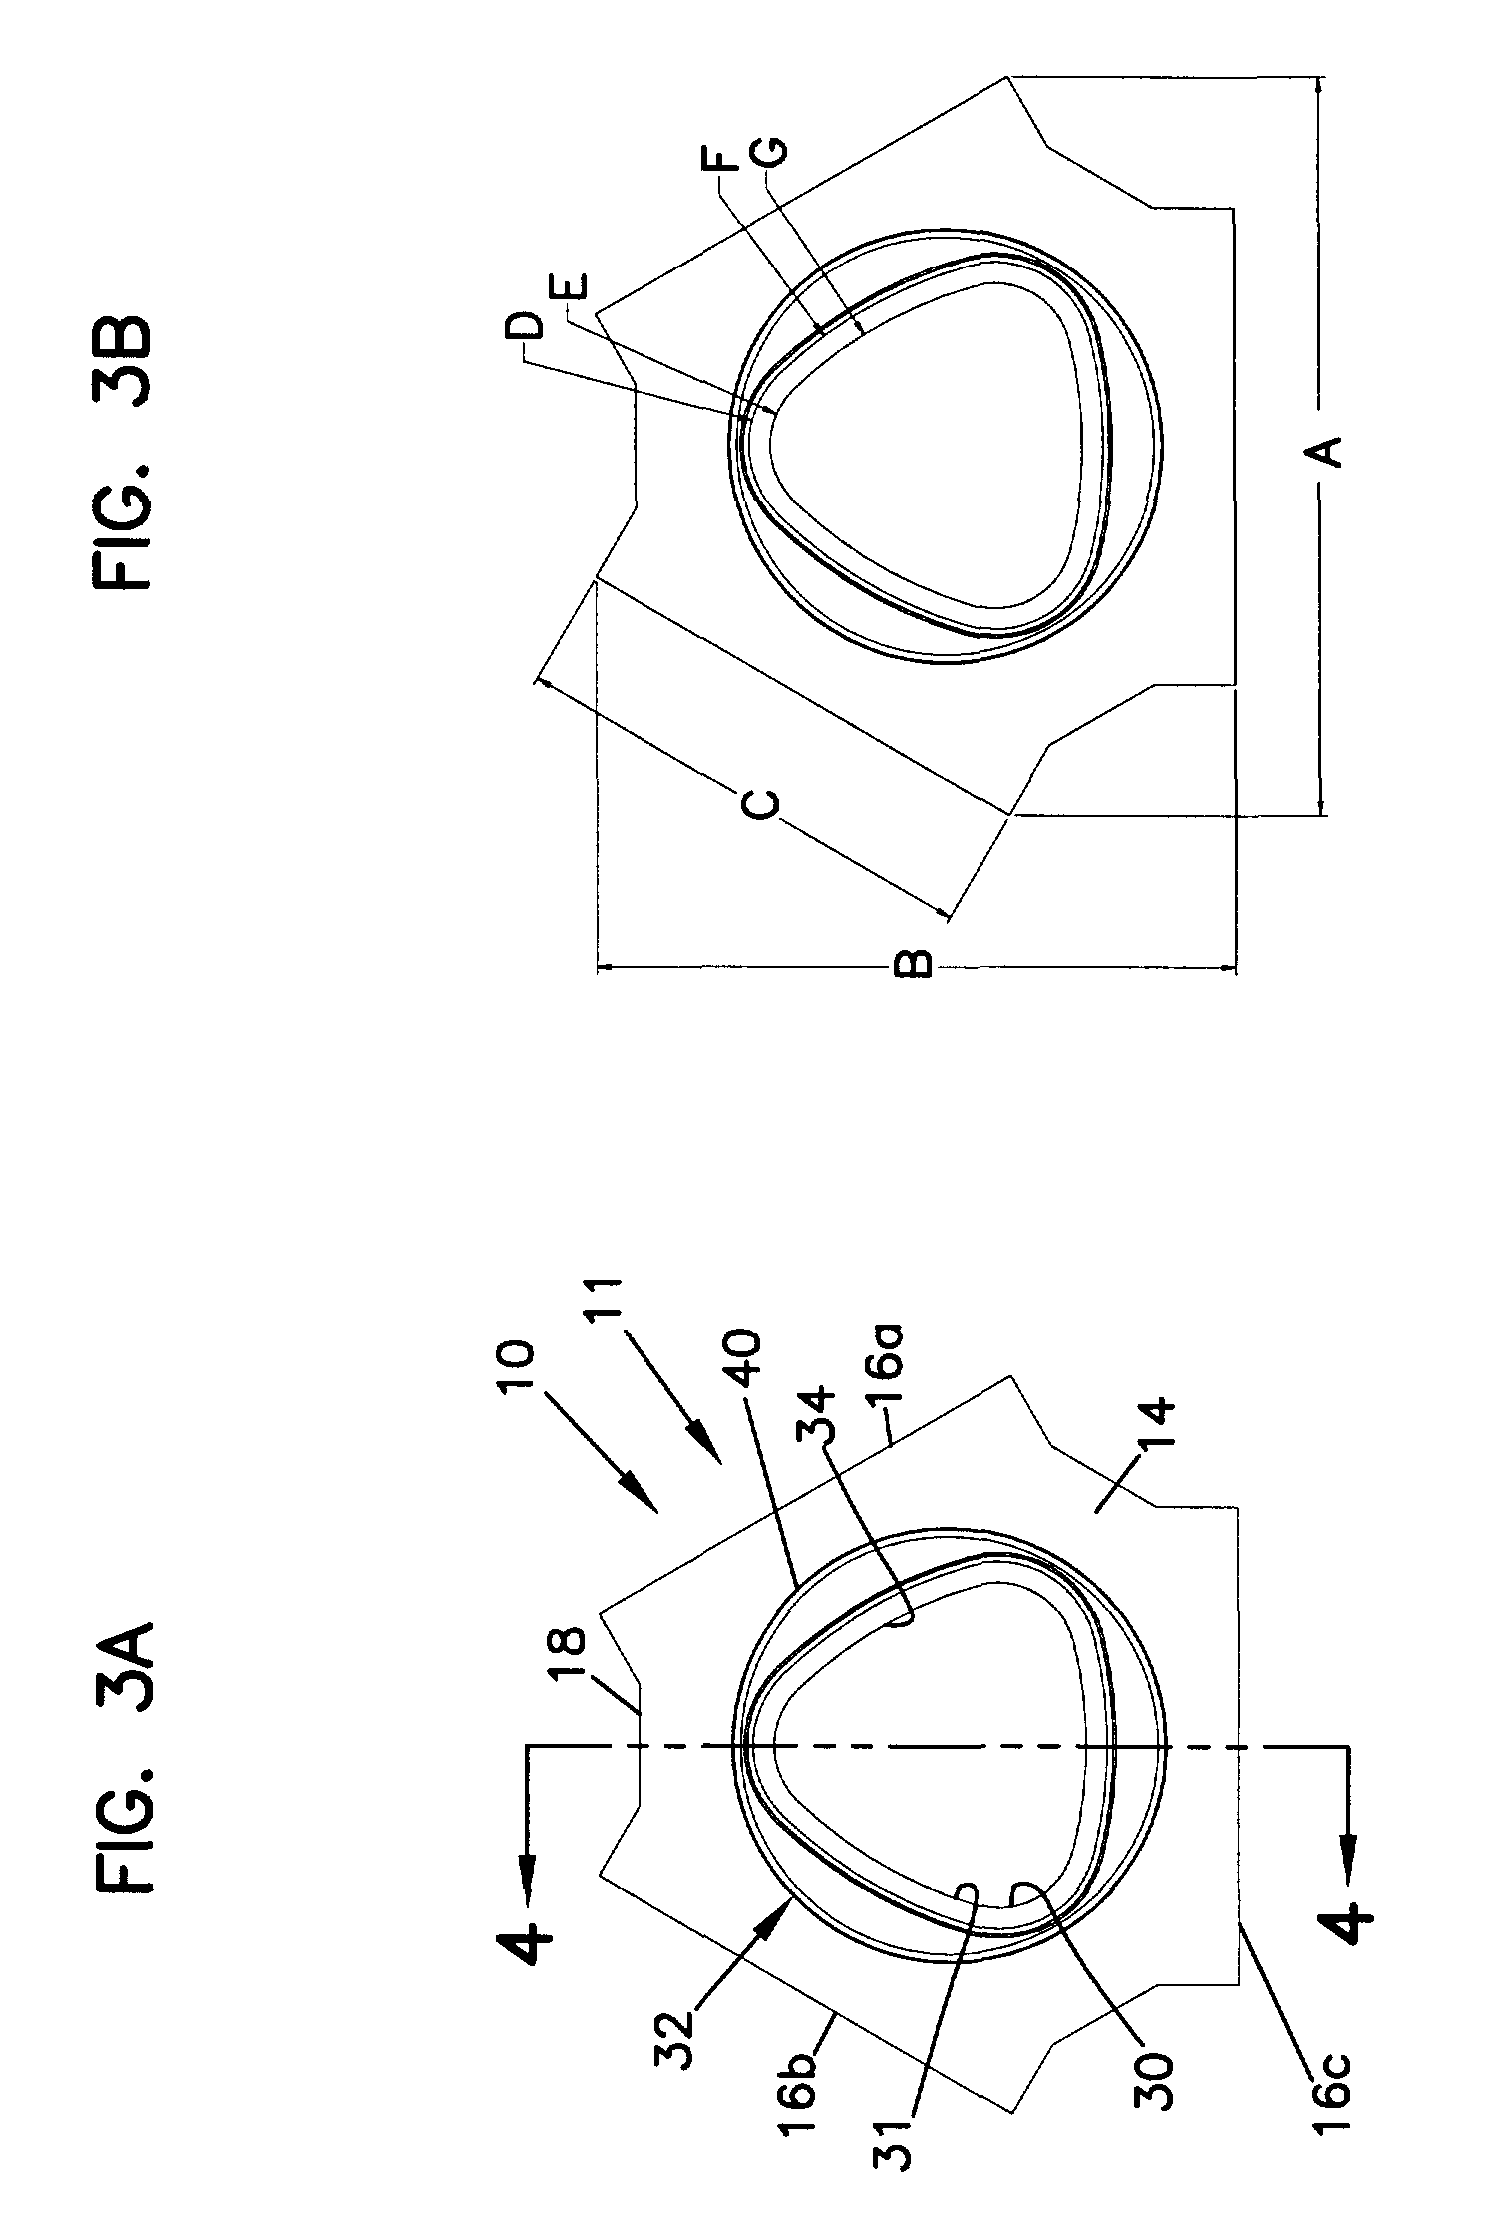 Non-cylindrical filter elements, and methods